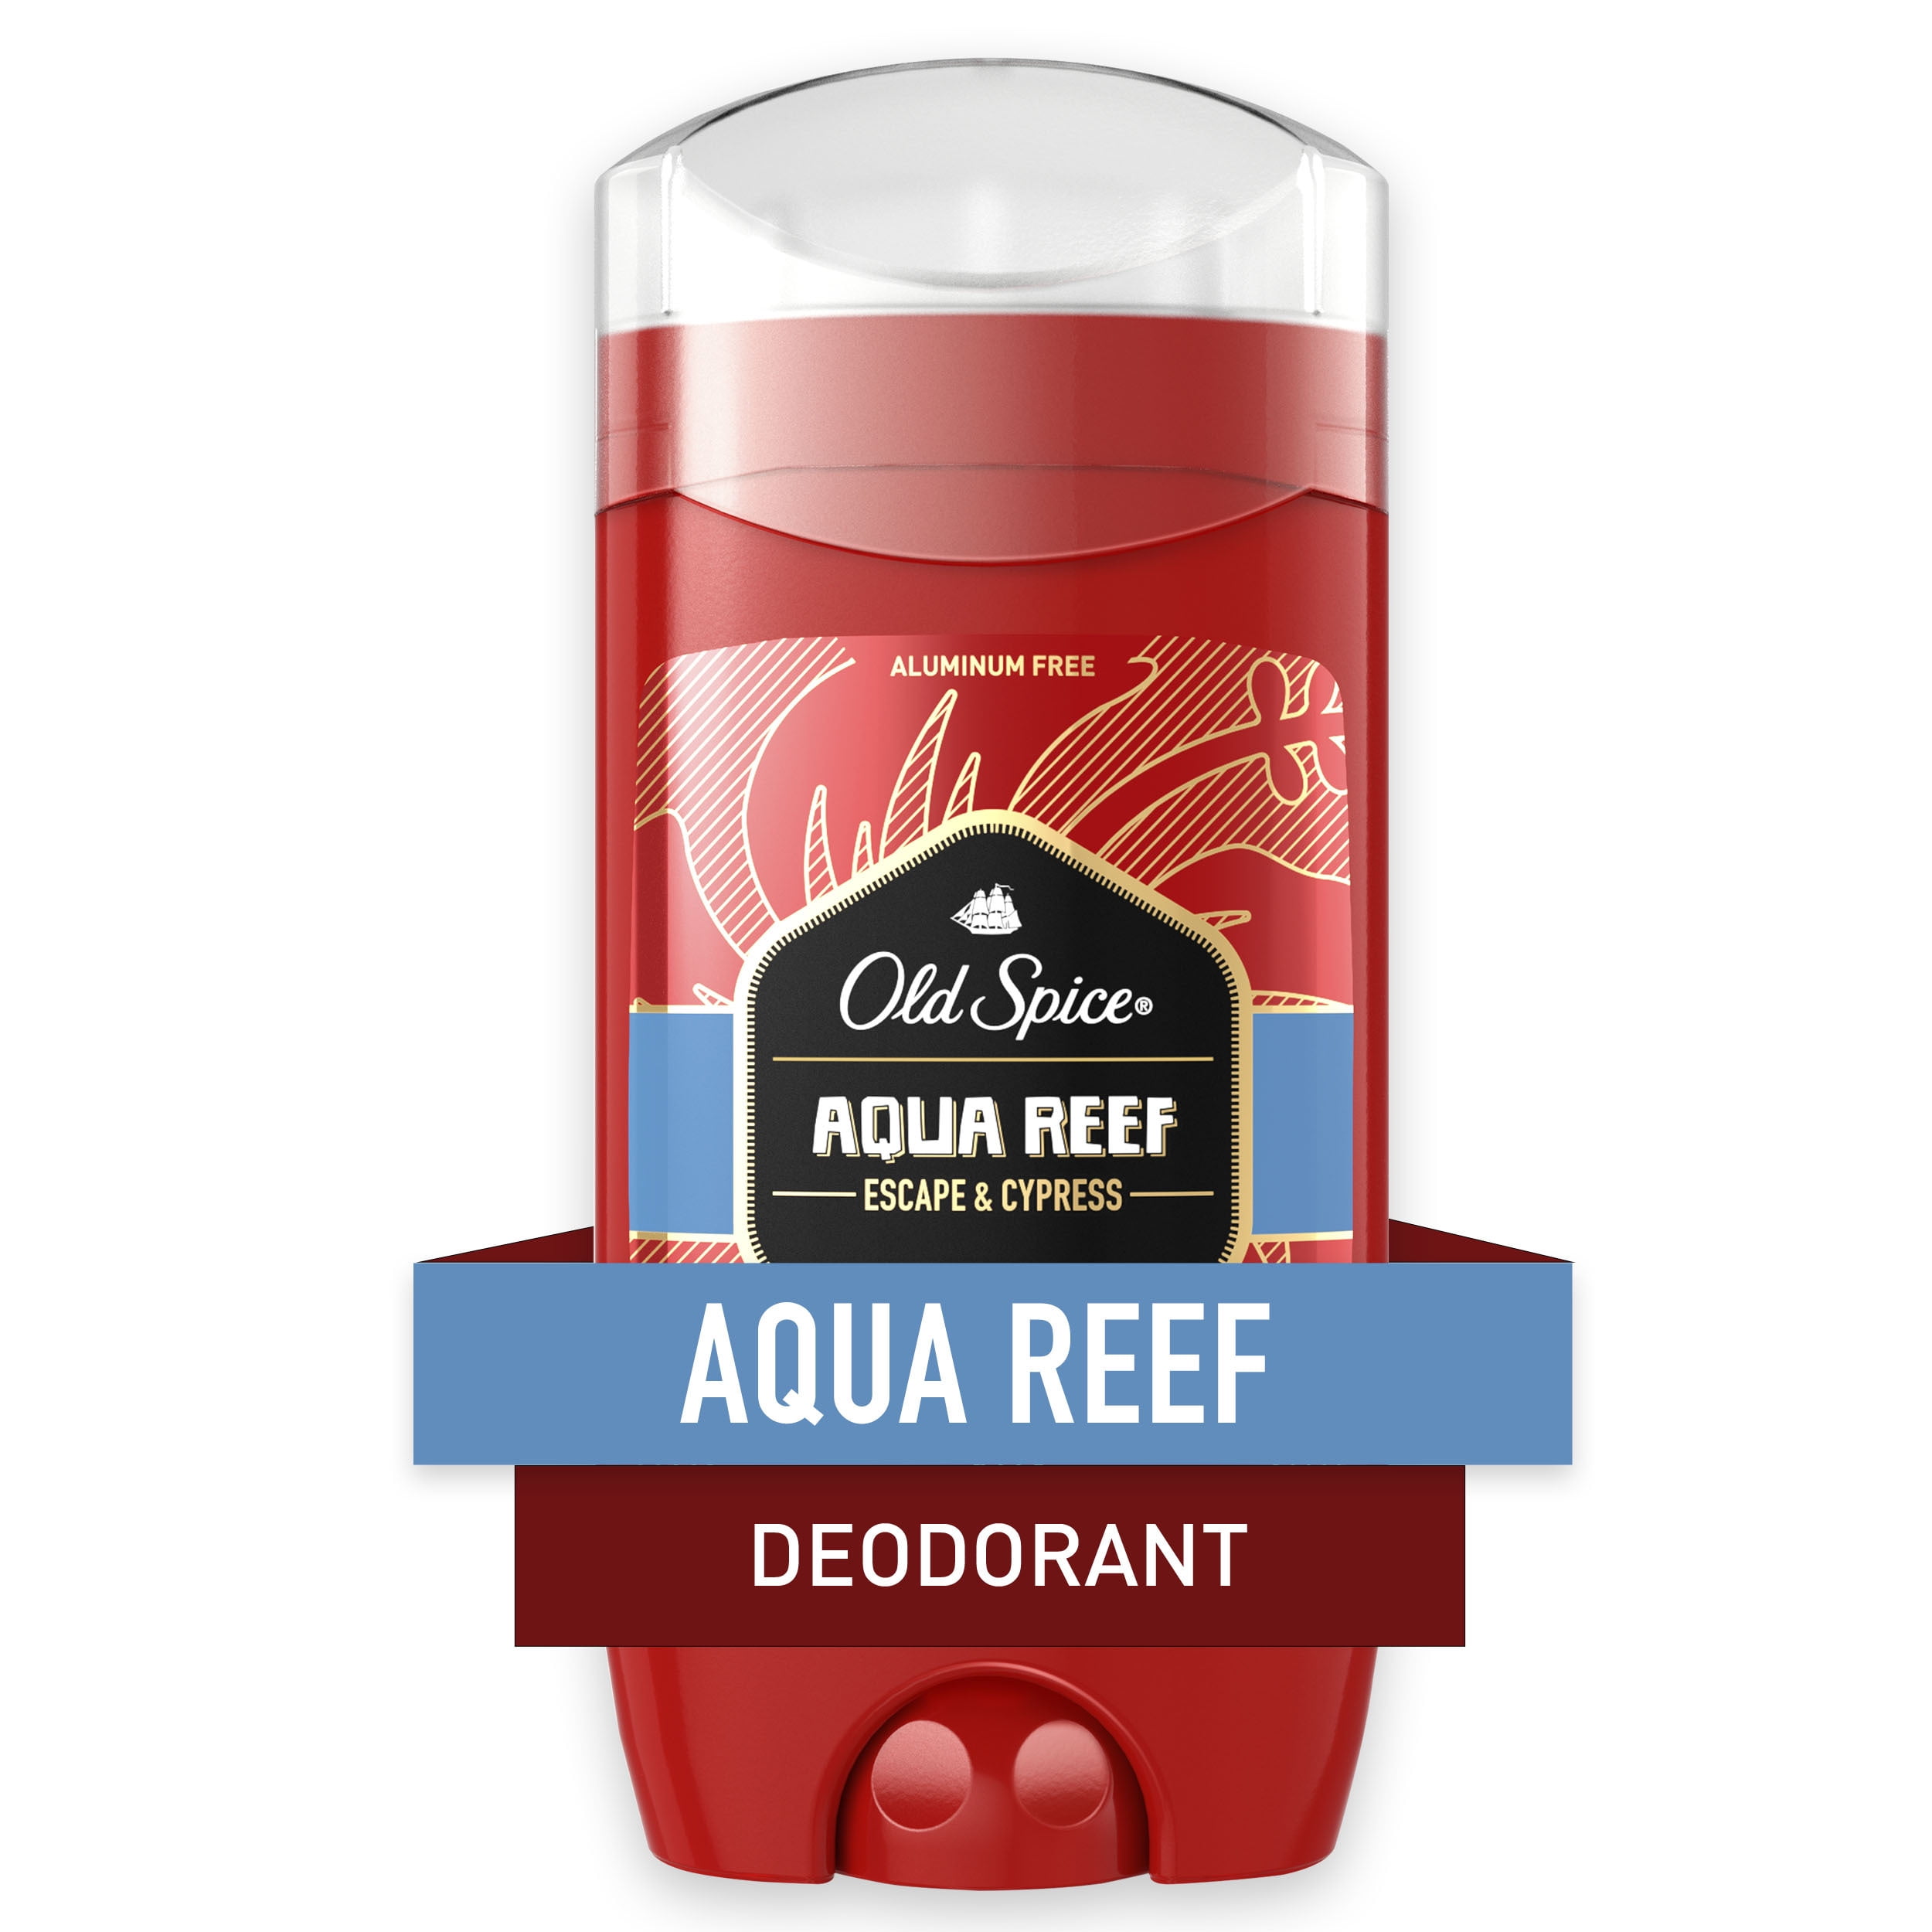 Old Spice Red Collection Deodorant for Men, Aqua Reef Scent, 3.0 oz